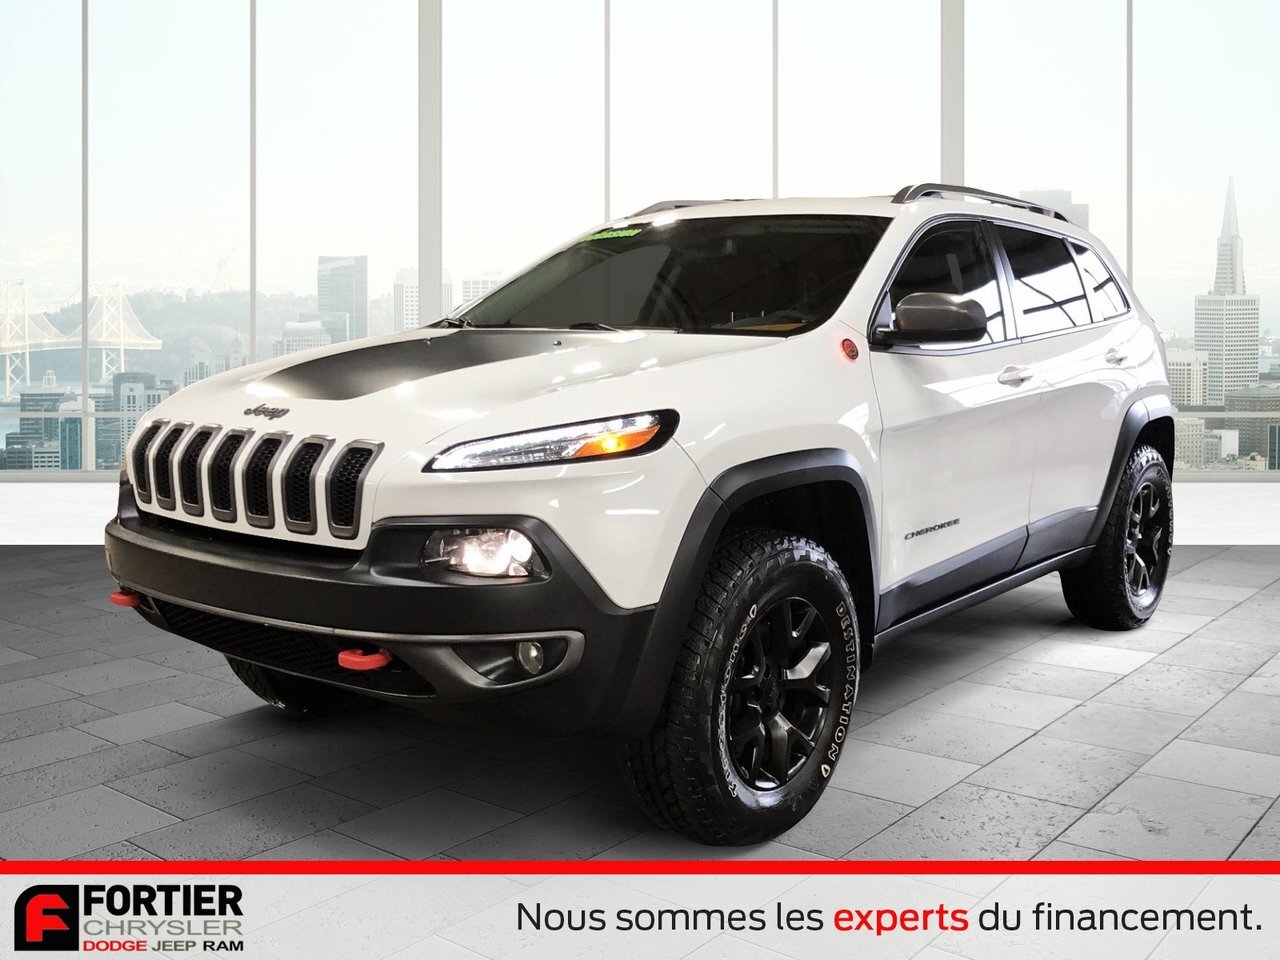 2015 Jeep Cherokee Trailhawk 4X4 + TEMPS FROIDS + ATTELAGE + 8.4 / 4X